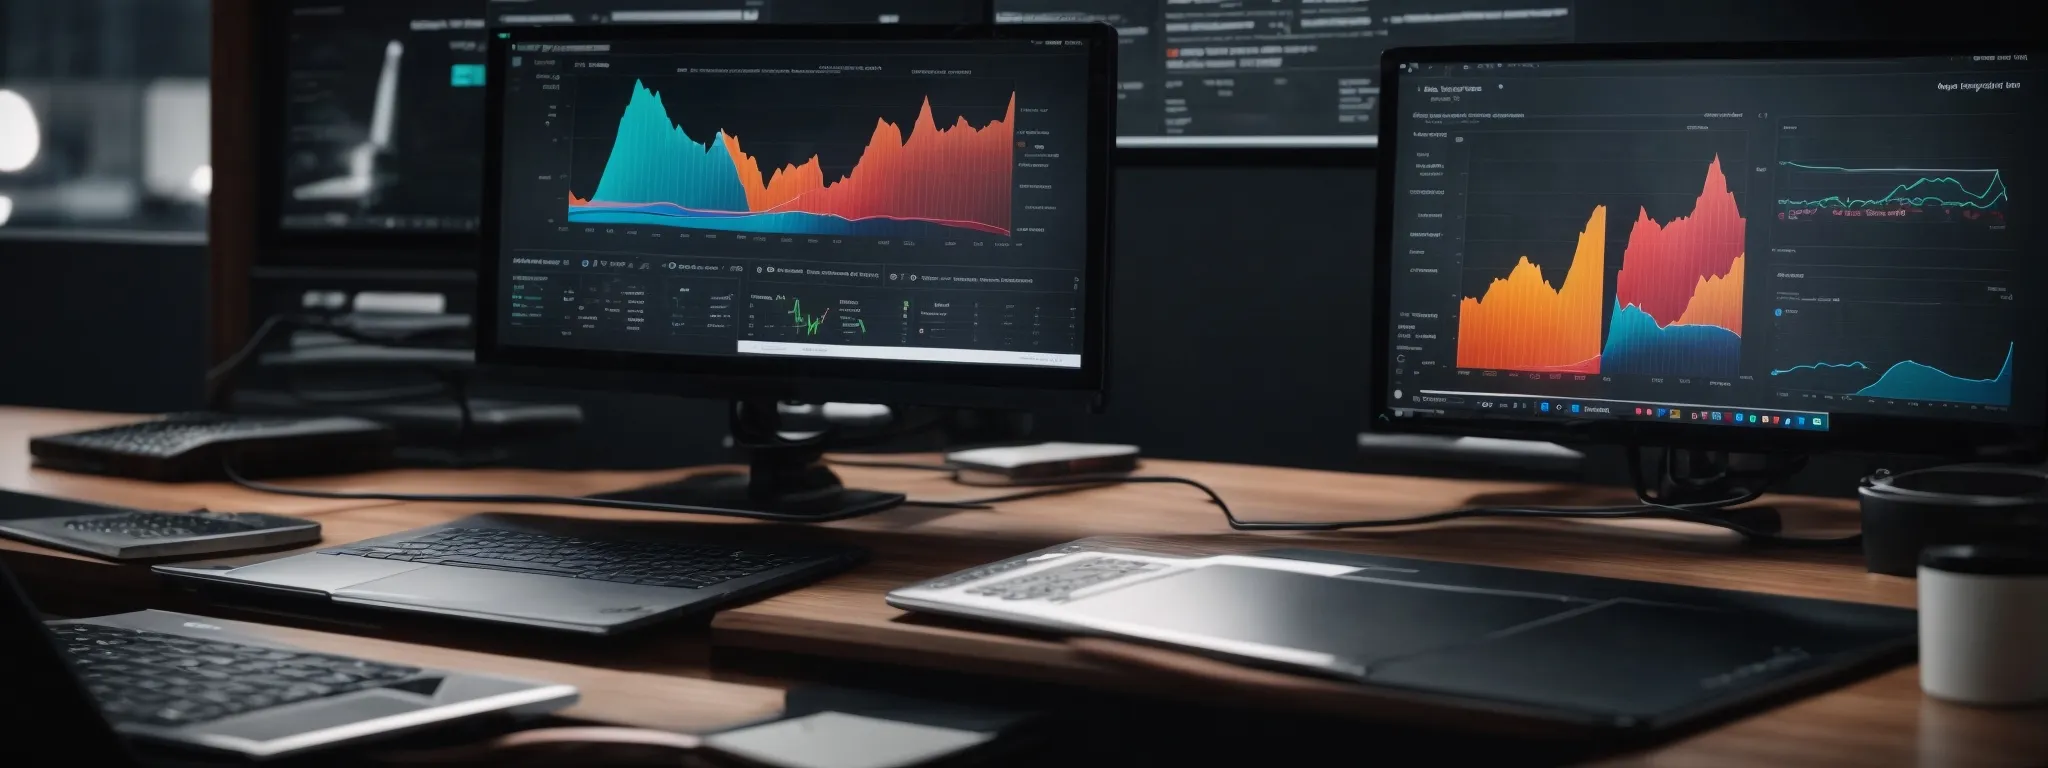 a desktop with an open laptop showing vibrant graphs and charts related to video analytics and seo performance.